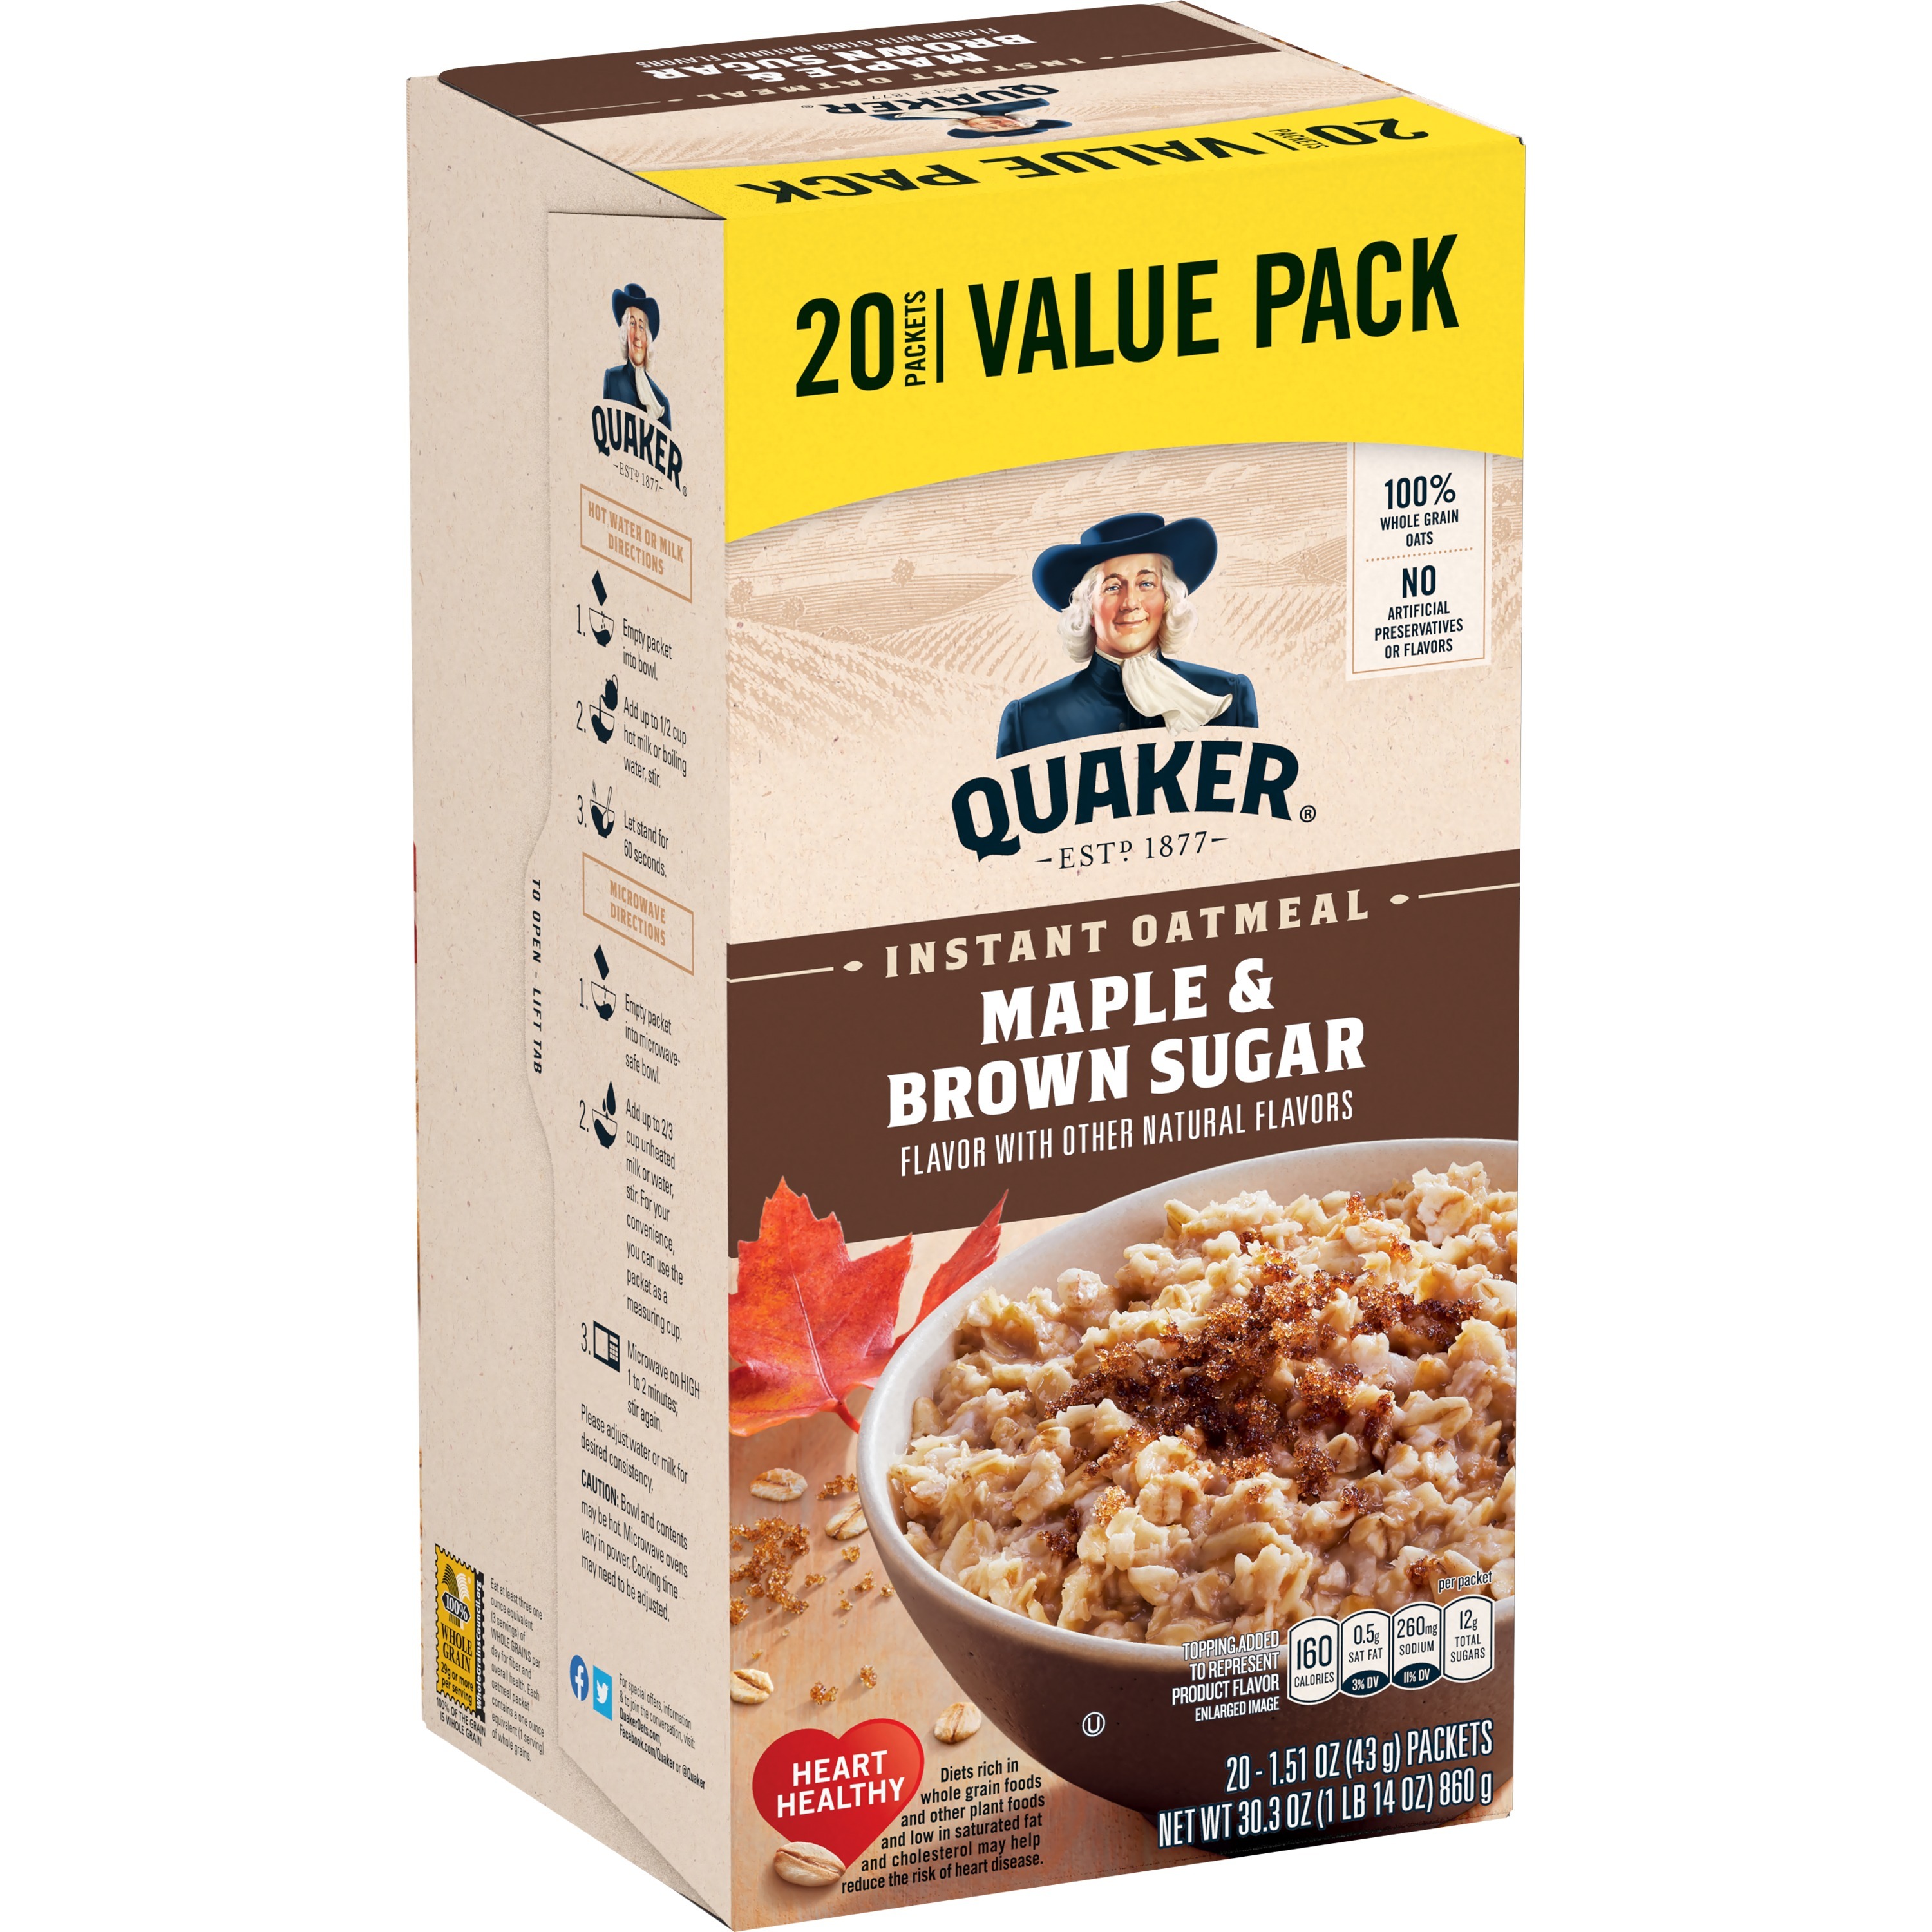 Quaker, Instant Oatmeal, Maple & Brown Sugar, Quick Cook Oatmeal, 1.51 oz, 20 Packets - image 3 of 8